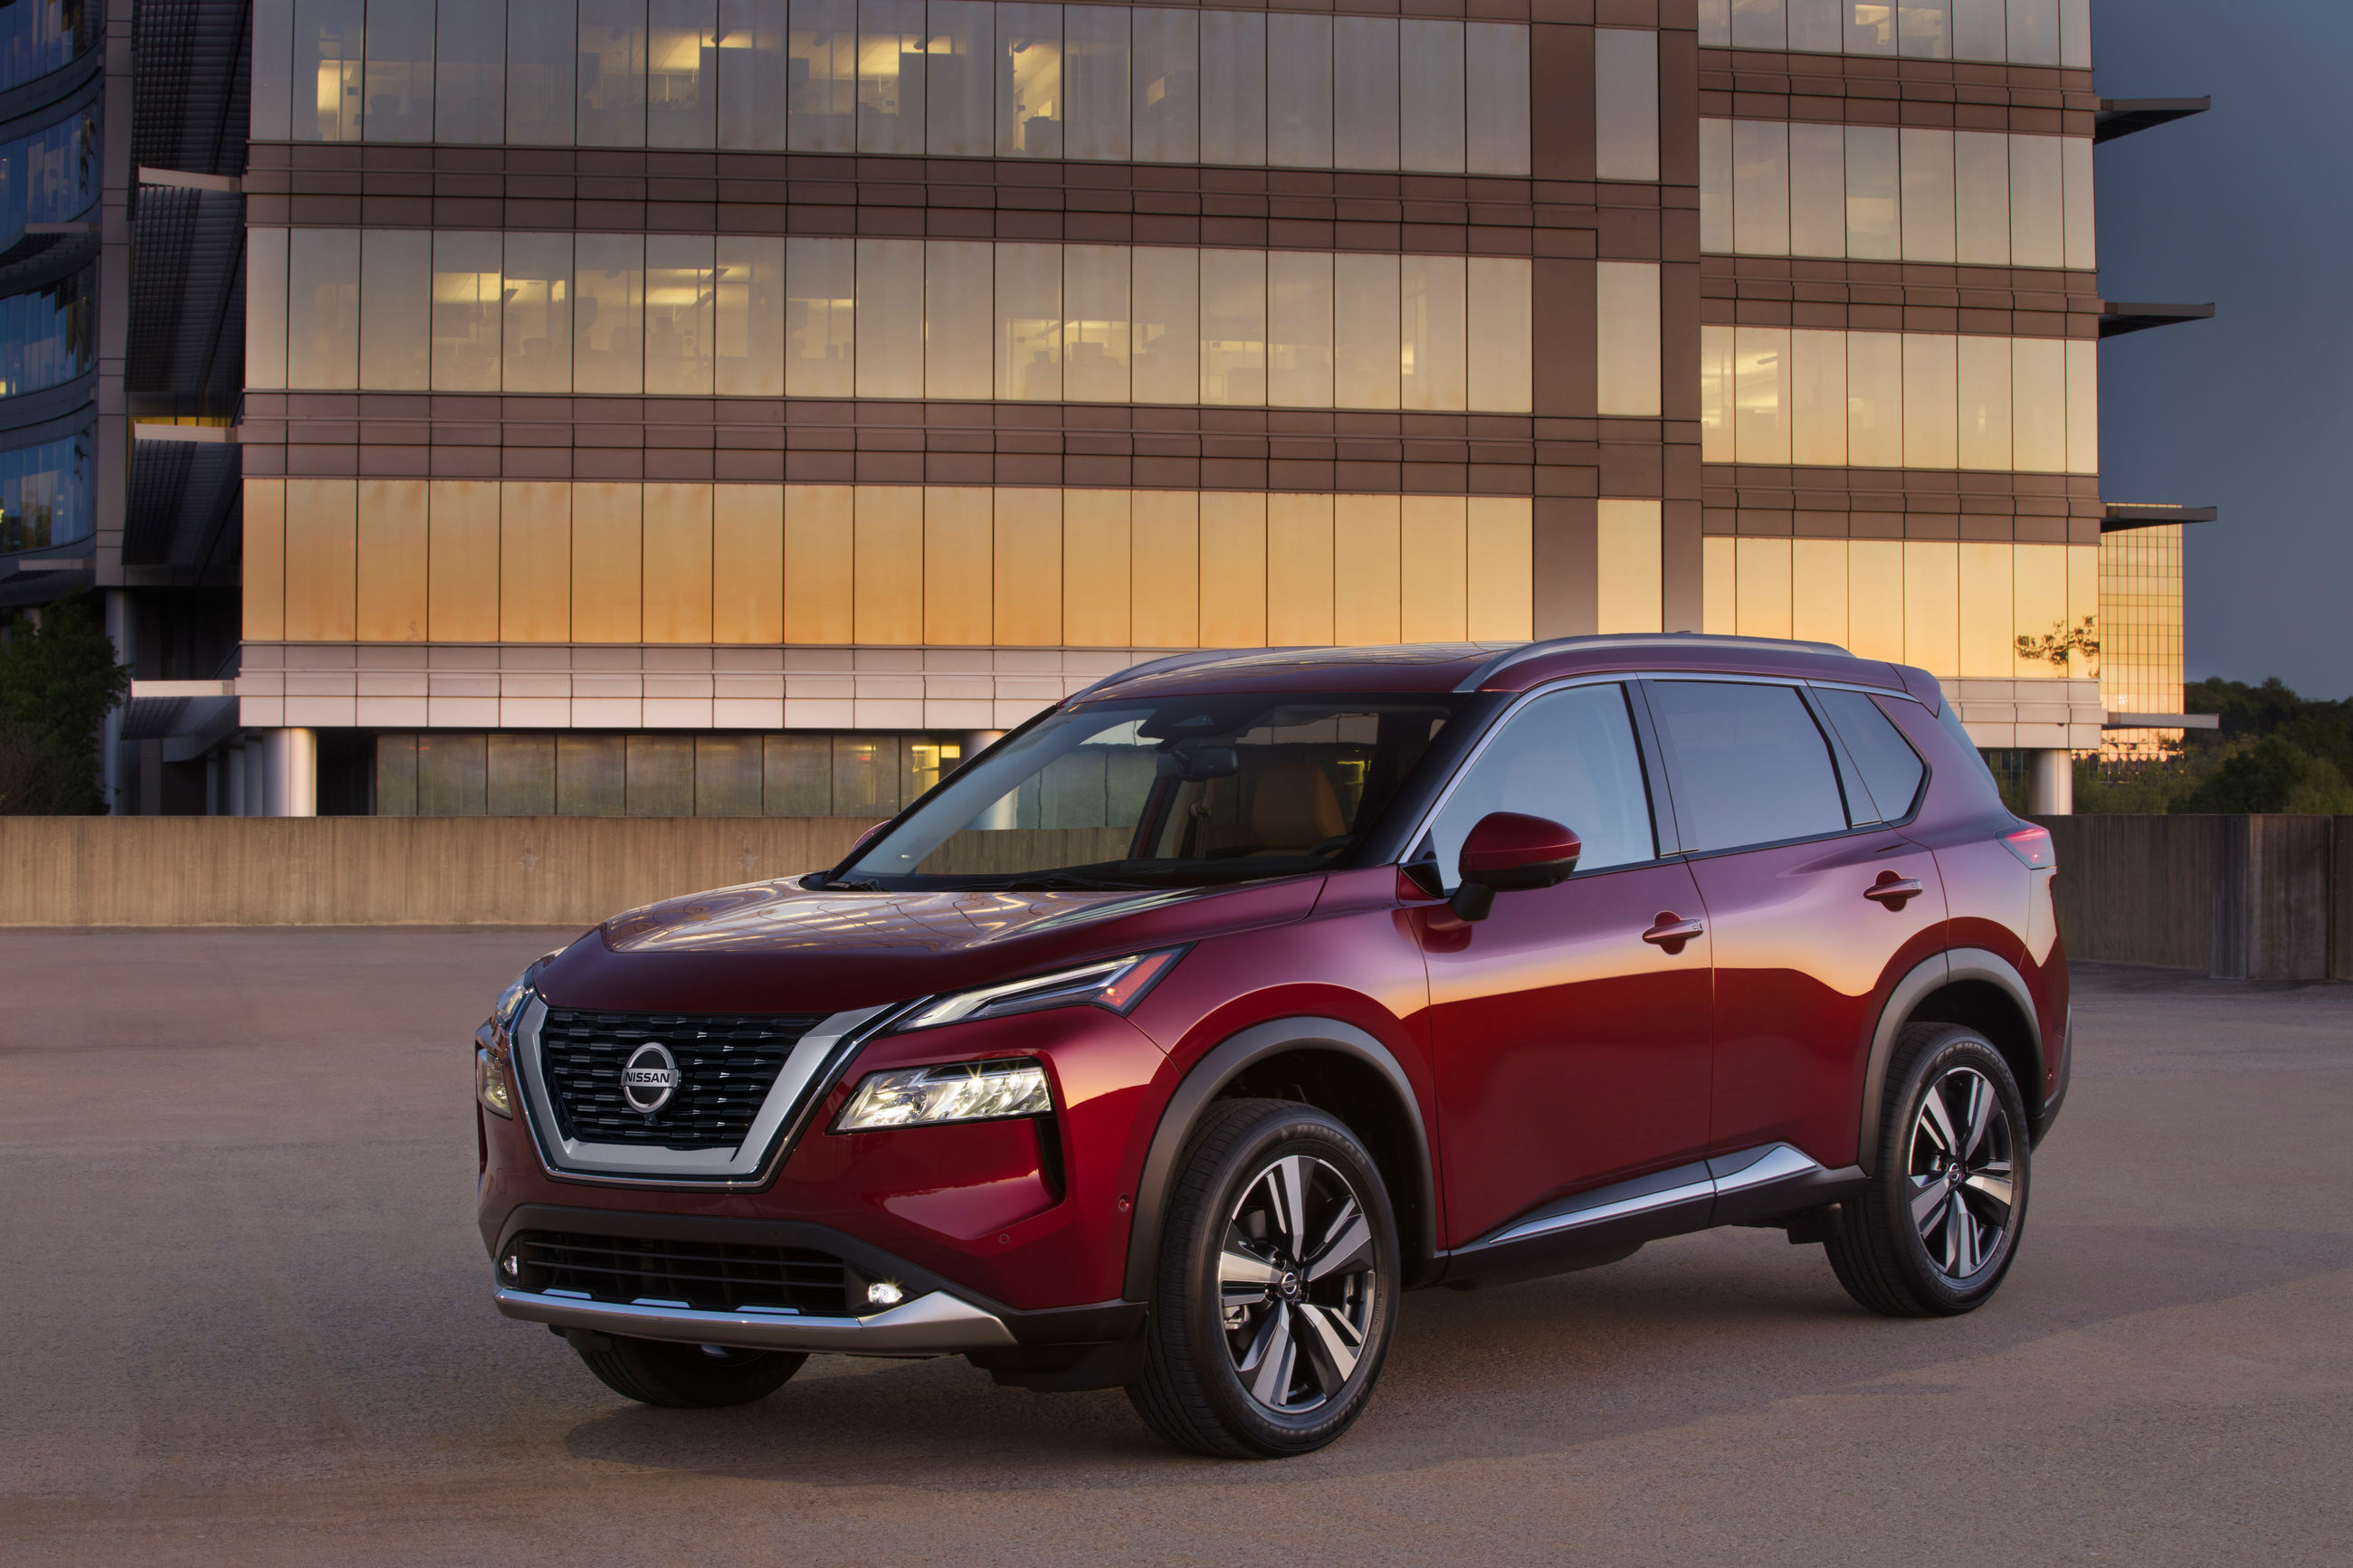 2021 Nissan Rogue: What Are The Critics Saying After Their First Drives?